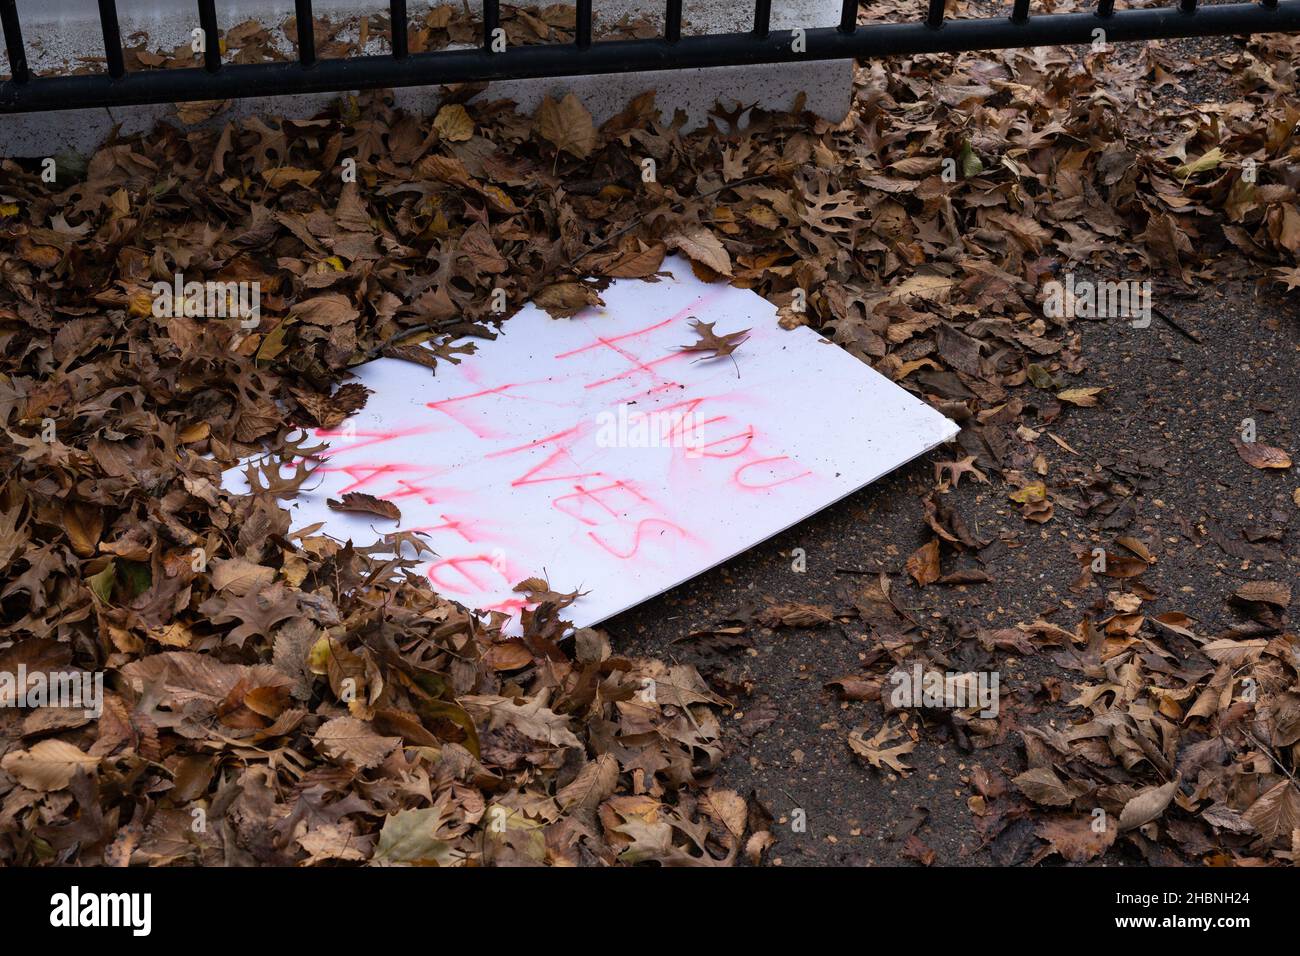 rain soaked and smeared discarded sign from a protest laying on the ground surrounded by dry leaves says Hindu Lives Matter Stock Photo